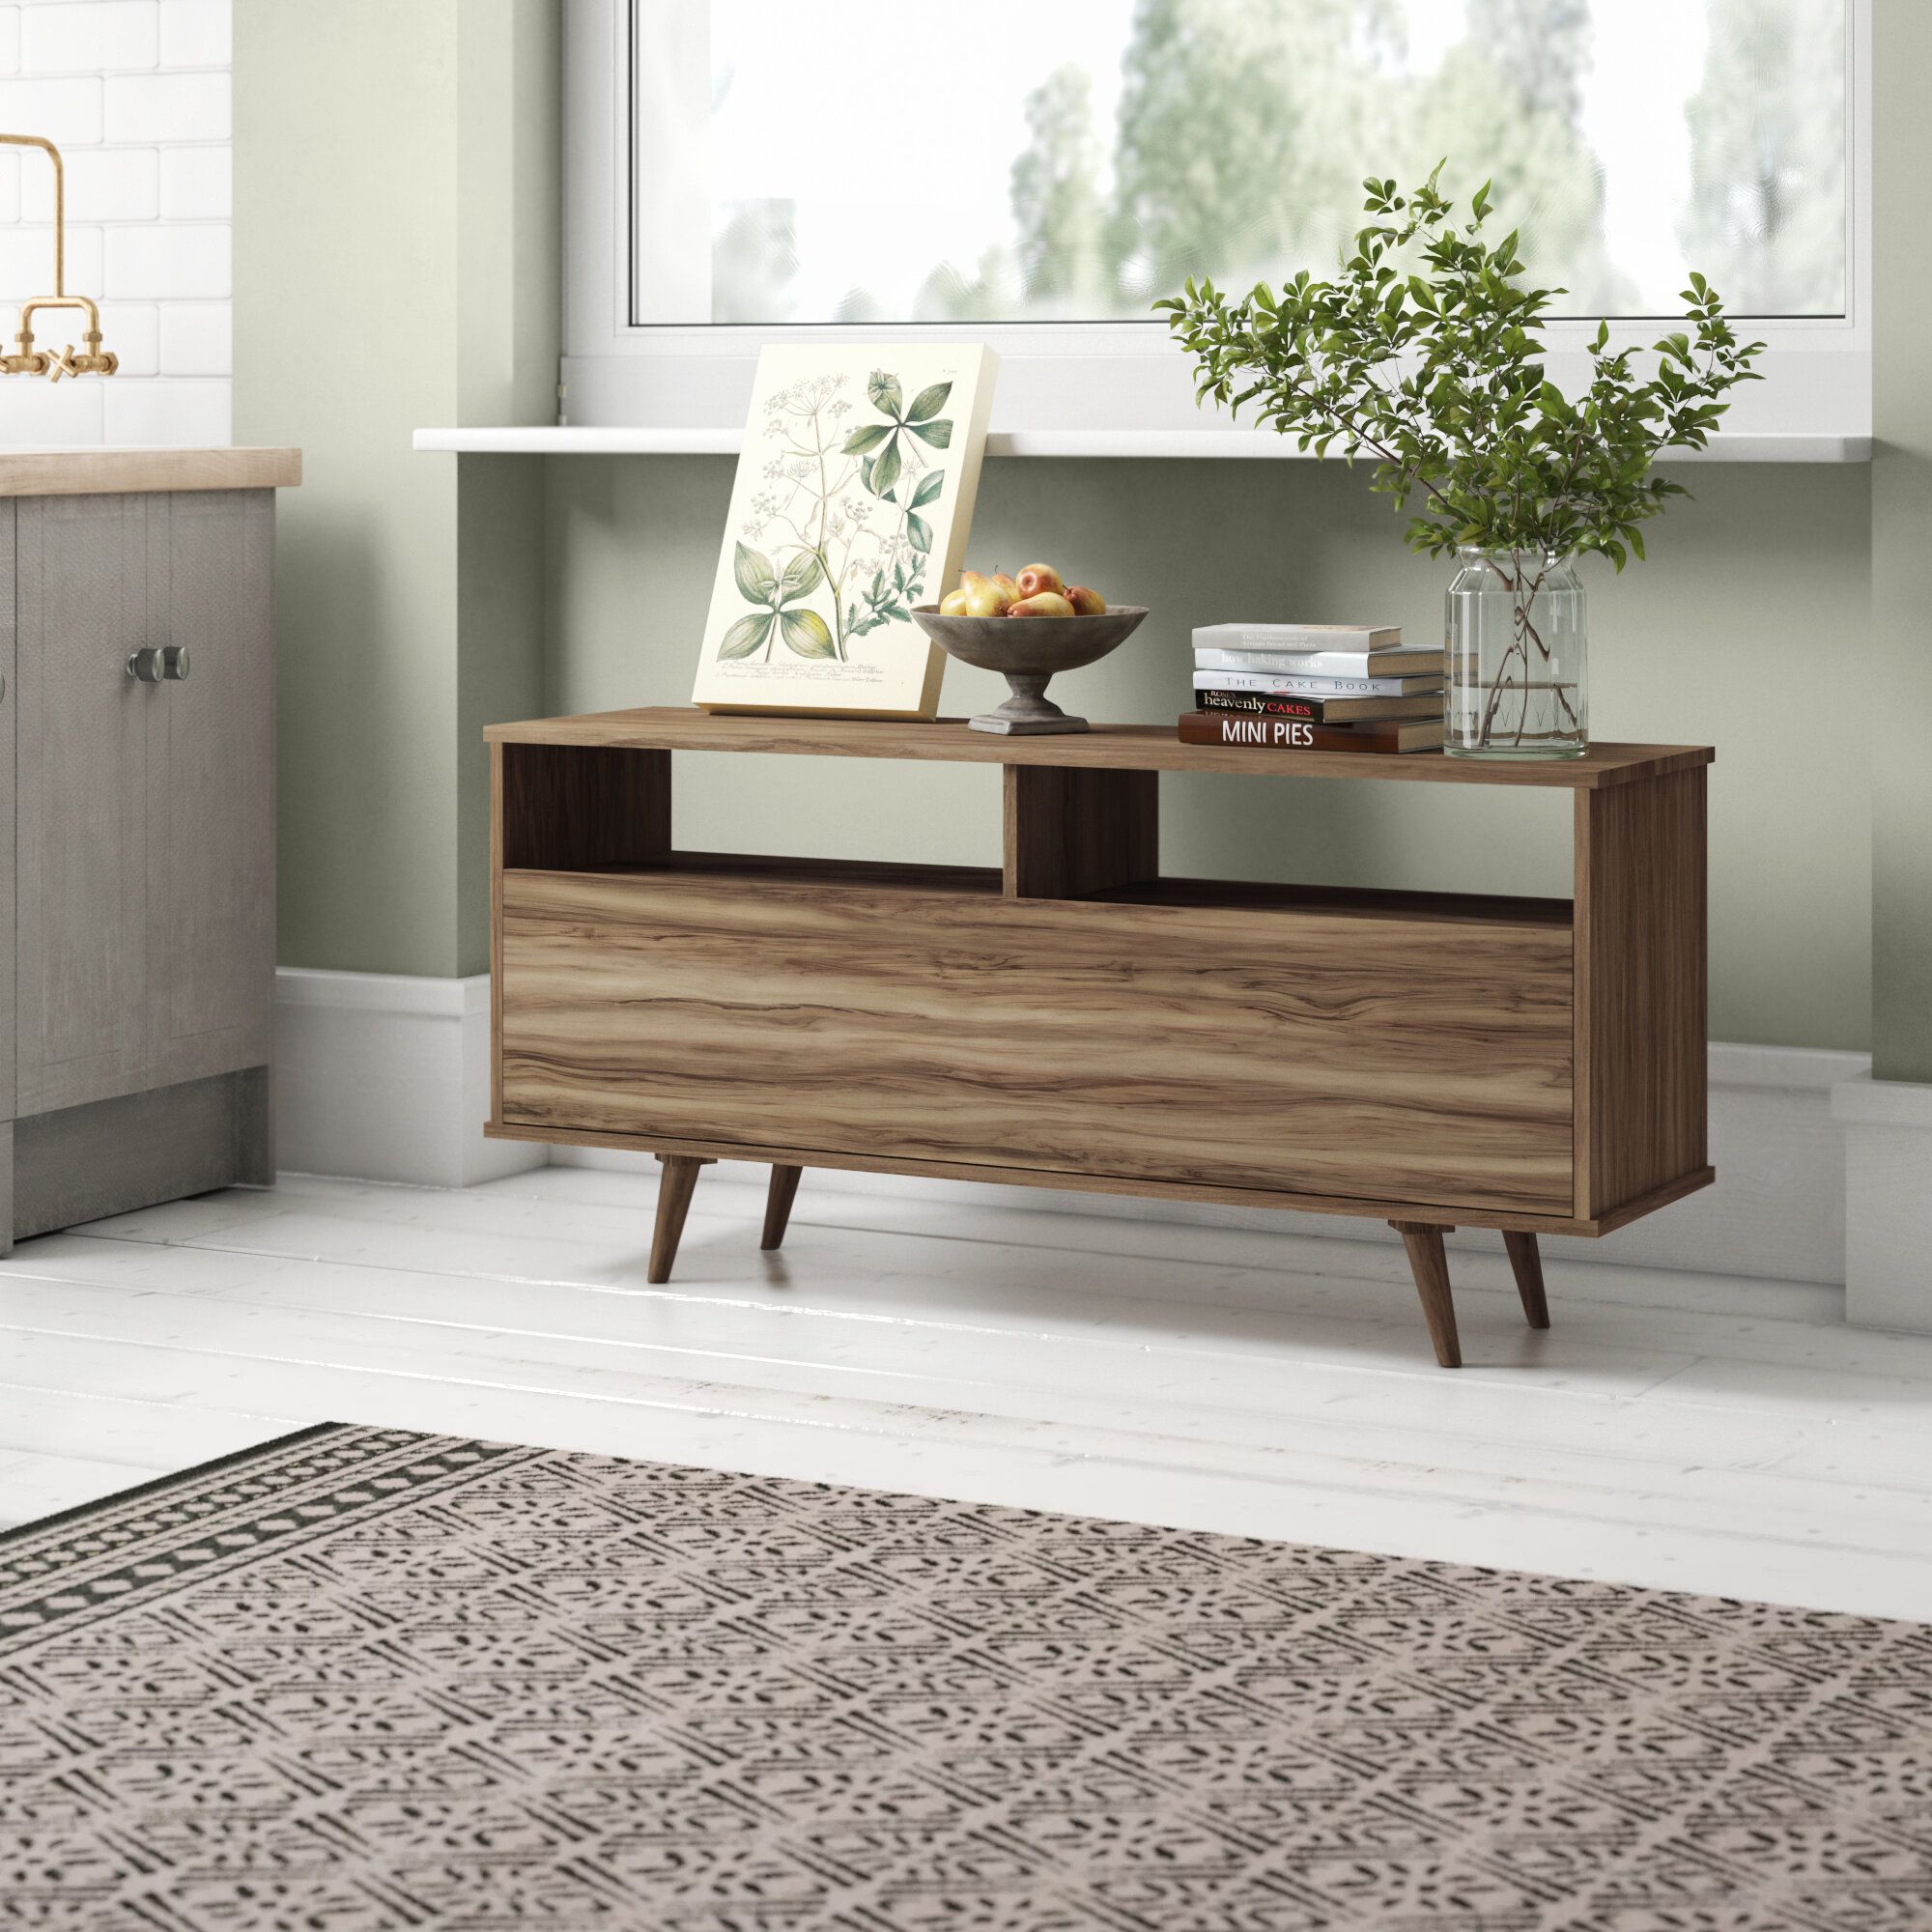 Union Rustic Terrence Classic Sideboard & Reviews | Wayfair In Longley Sideboards (View 6 of 30)